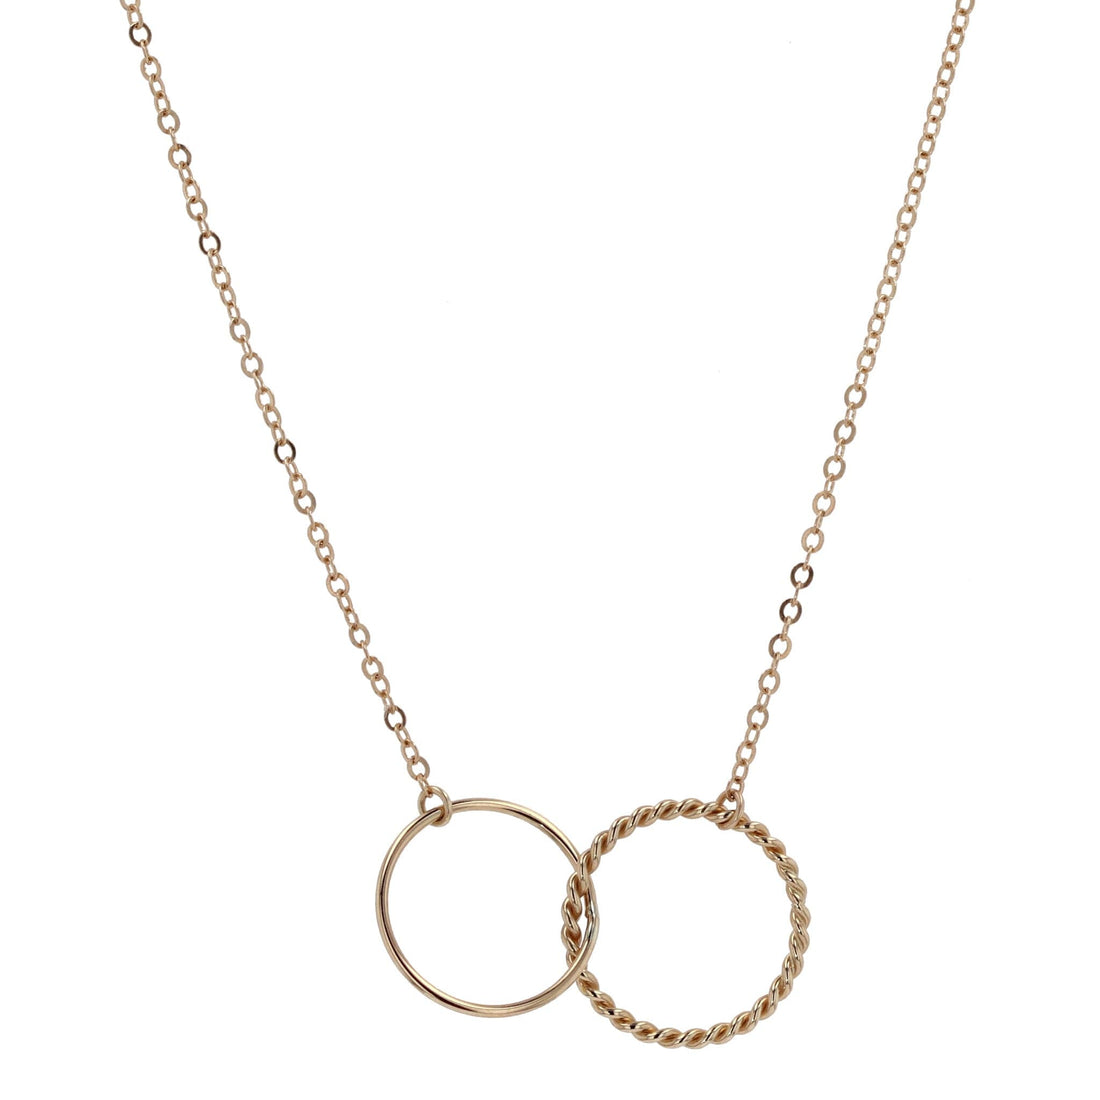 Yellow Gold Interlocked Circles Pendant Necklace by Carla | Nancy B. - Skeie's Jewelers